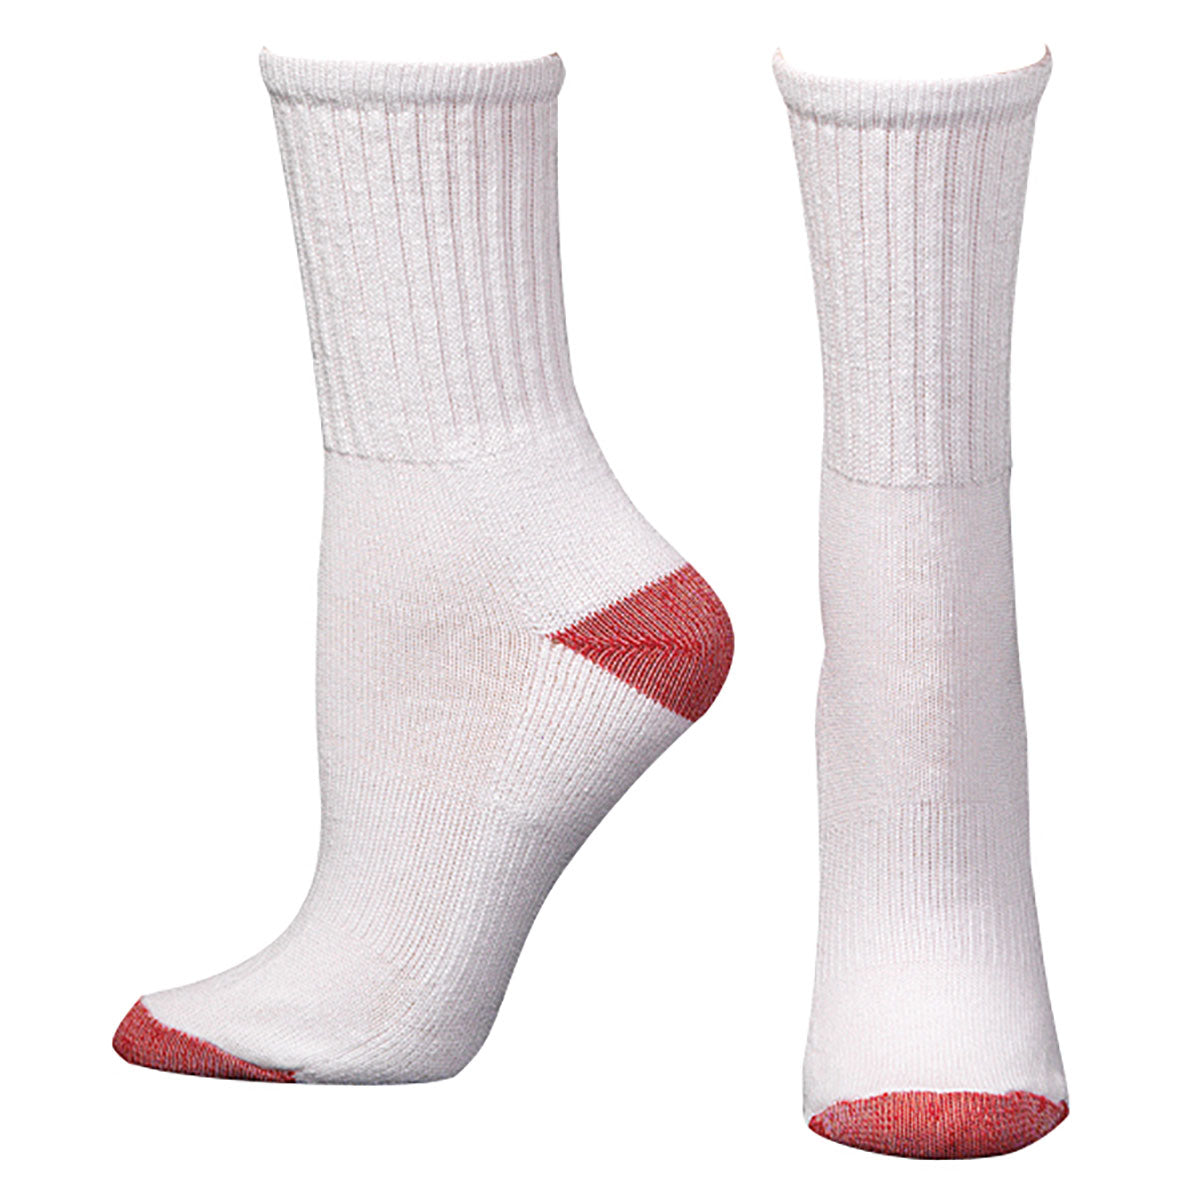 Boot Doctor Youth Crew Socks-3 pack